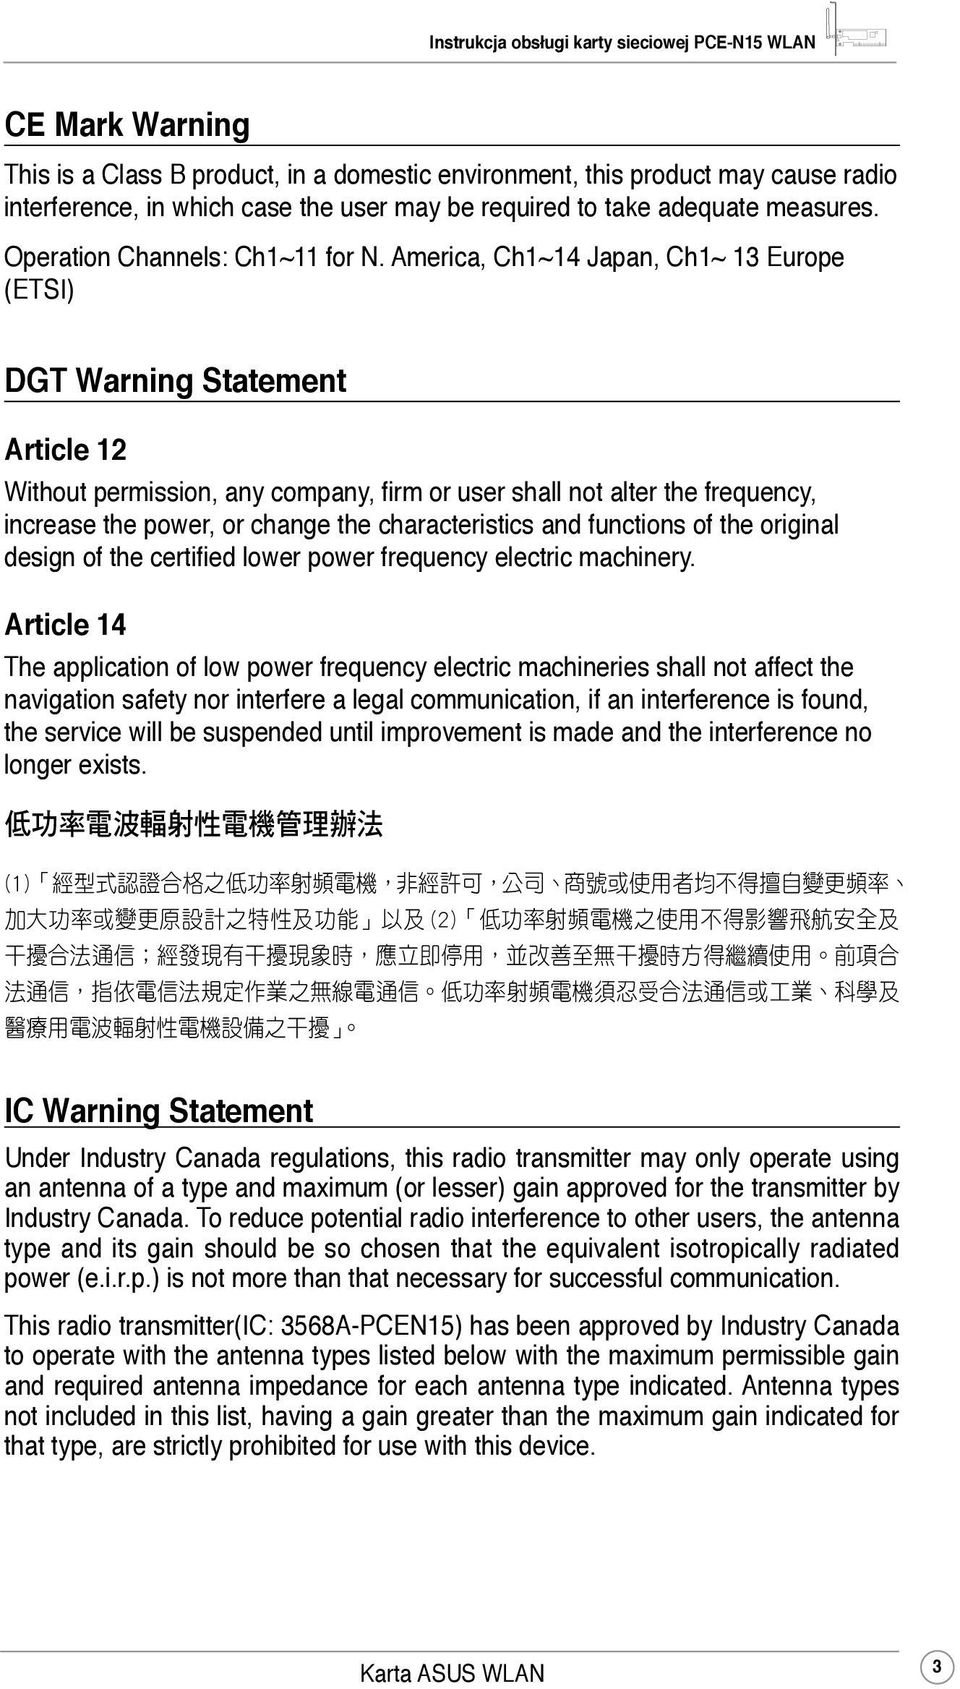 America, Ch1~14 Japan, Ch1~ 13 Europe (ETSI) DGT Warning Statement Article 12 Without permission, any company, firm or user shall not alter the frequency, increase the power, or change the